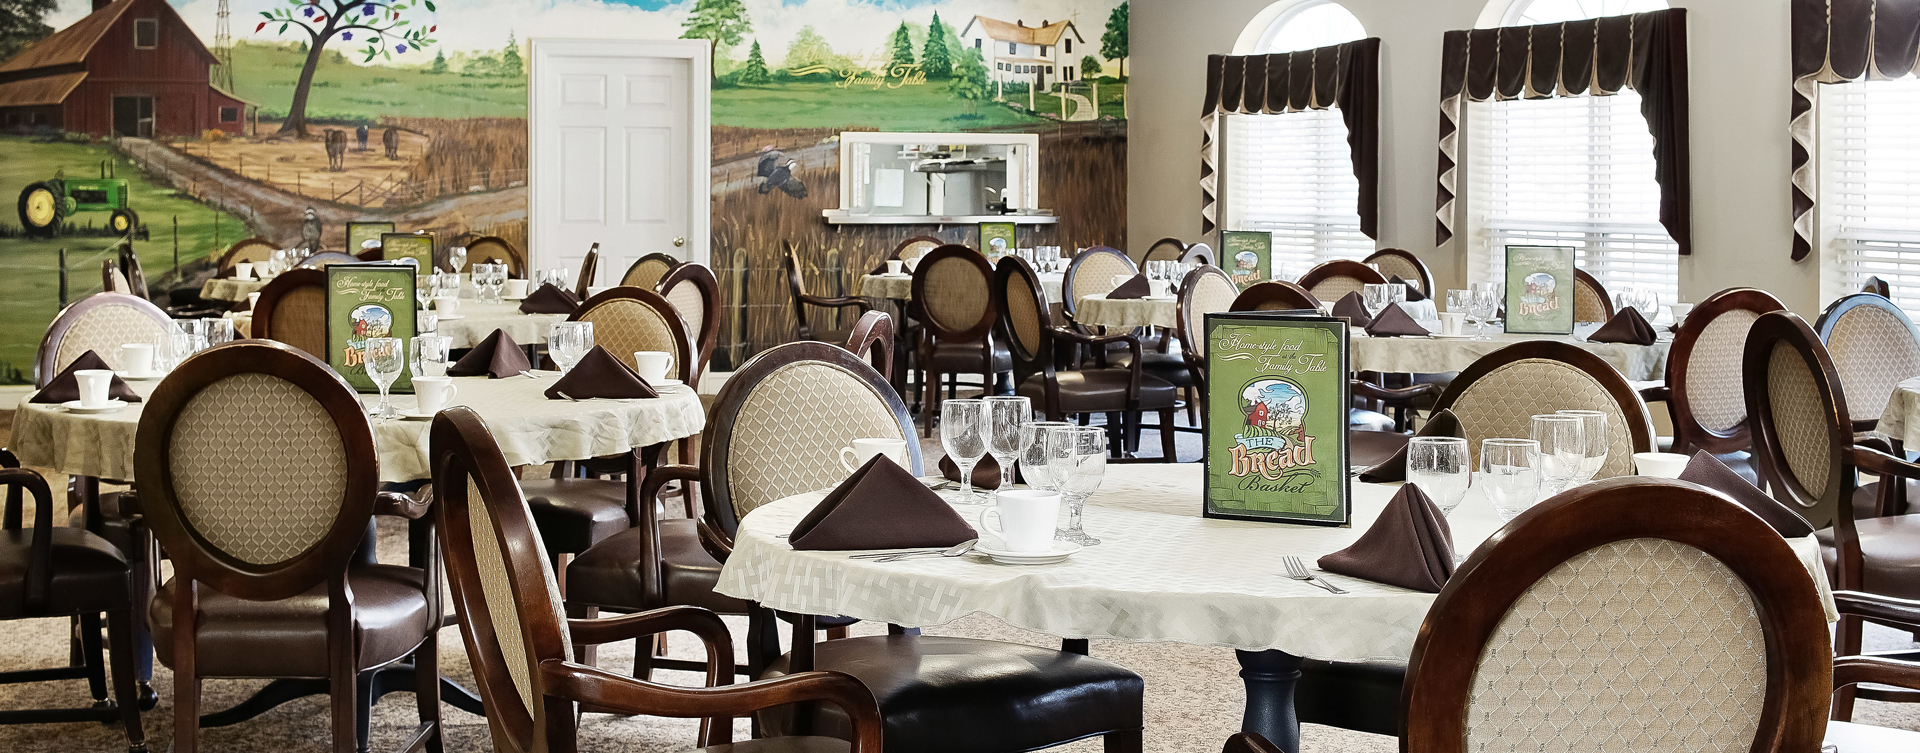 Food is best when shared with friends in the dining room at Bickford at Mission Springs